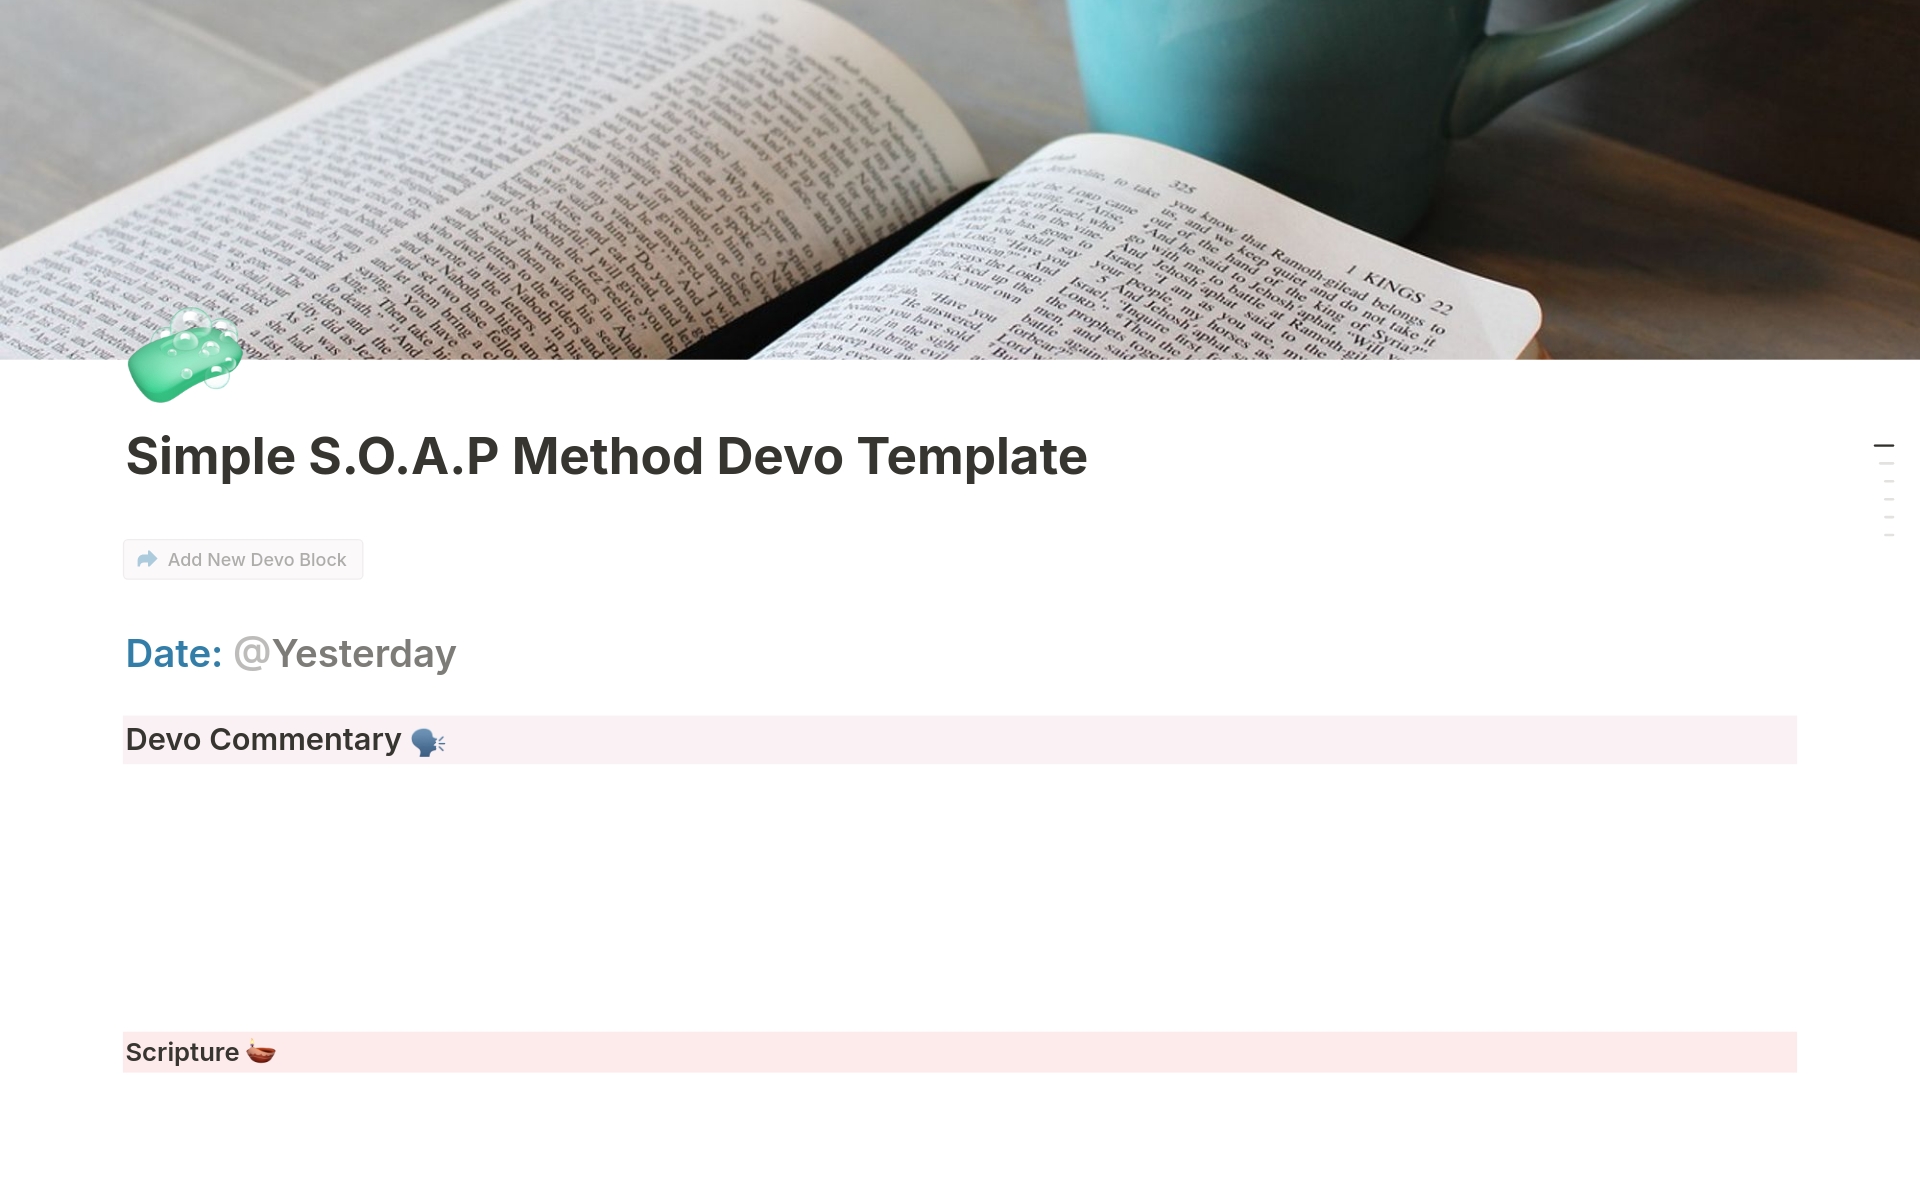 An easy-to-use Bible Study template, following the S.O.A.P. Method of Bible Study: Scripture/Observation/Application/Prayer. 